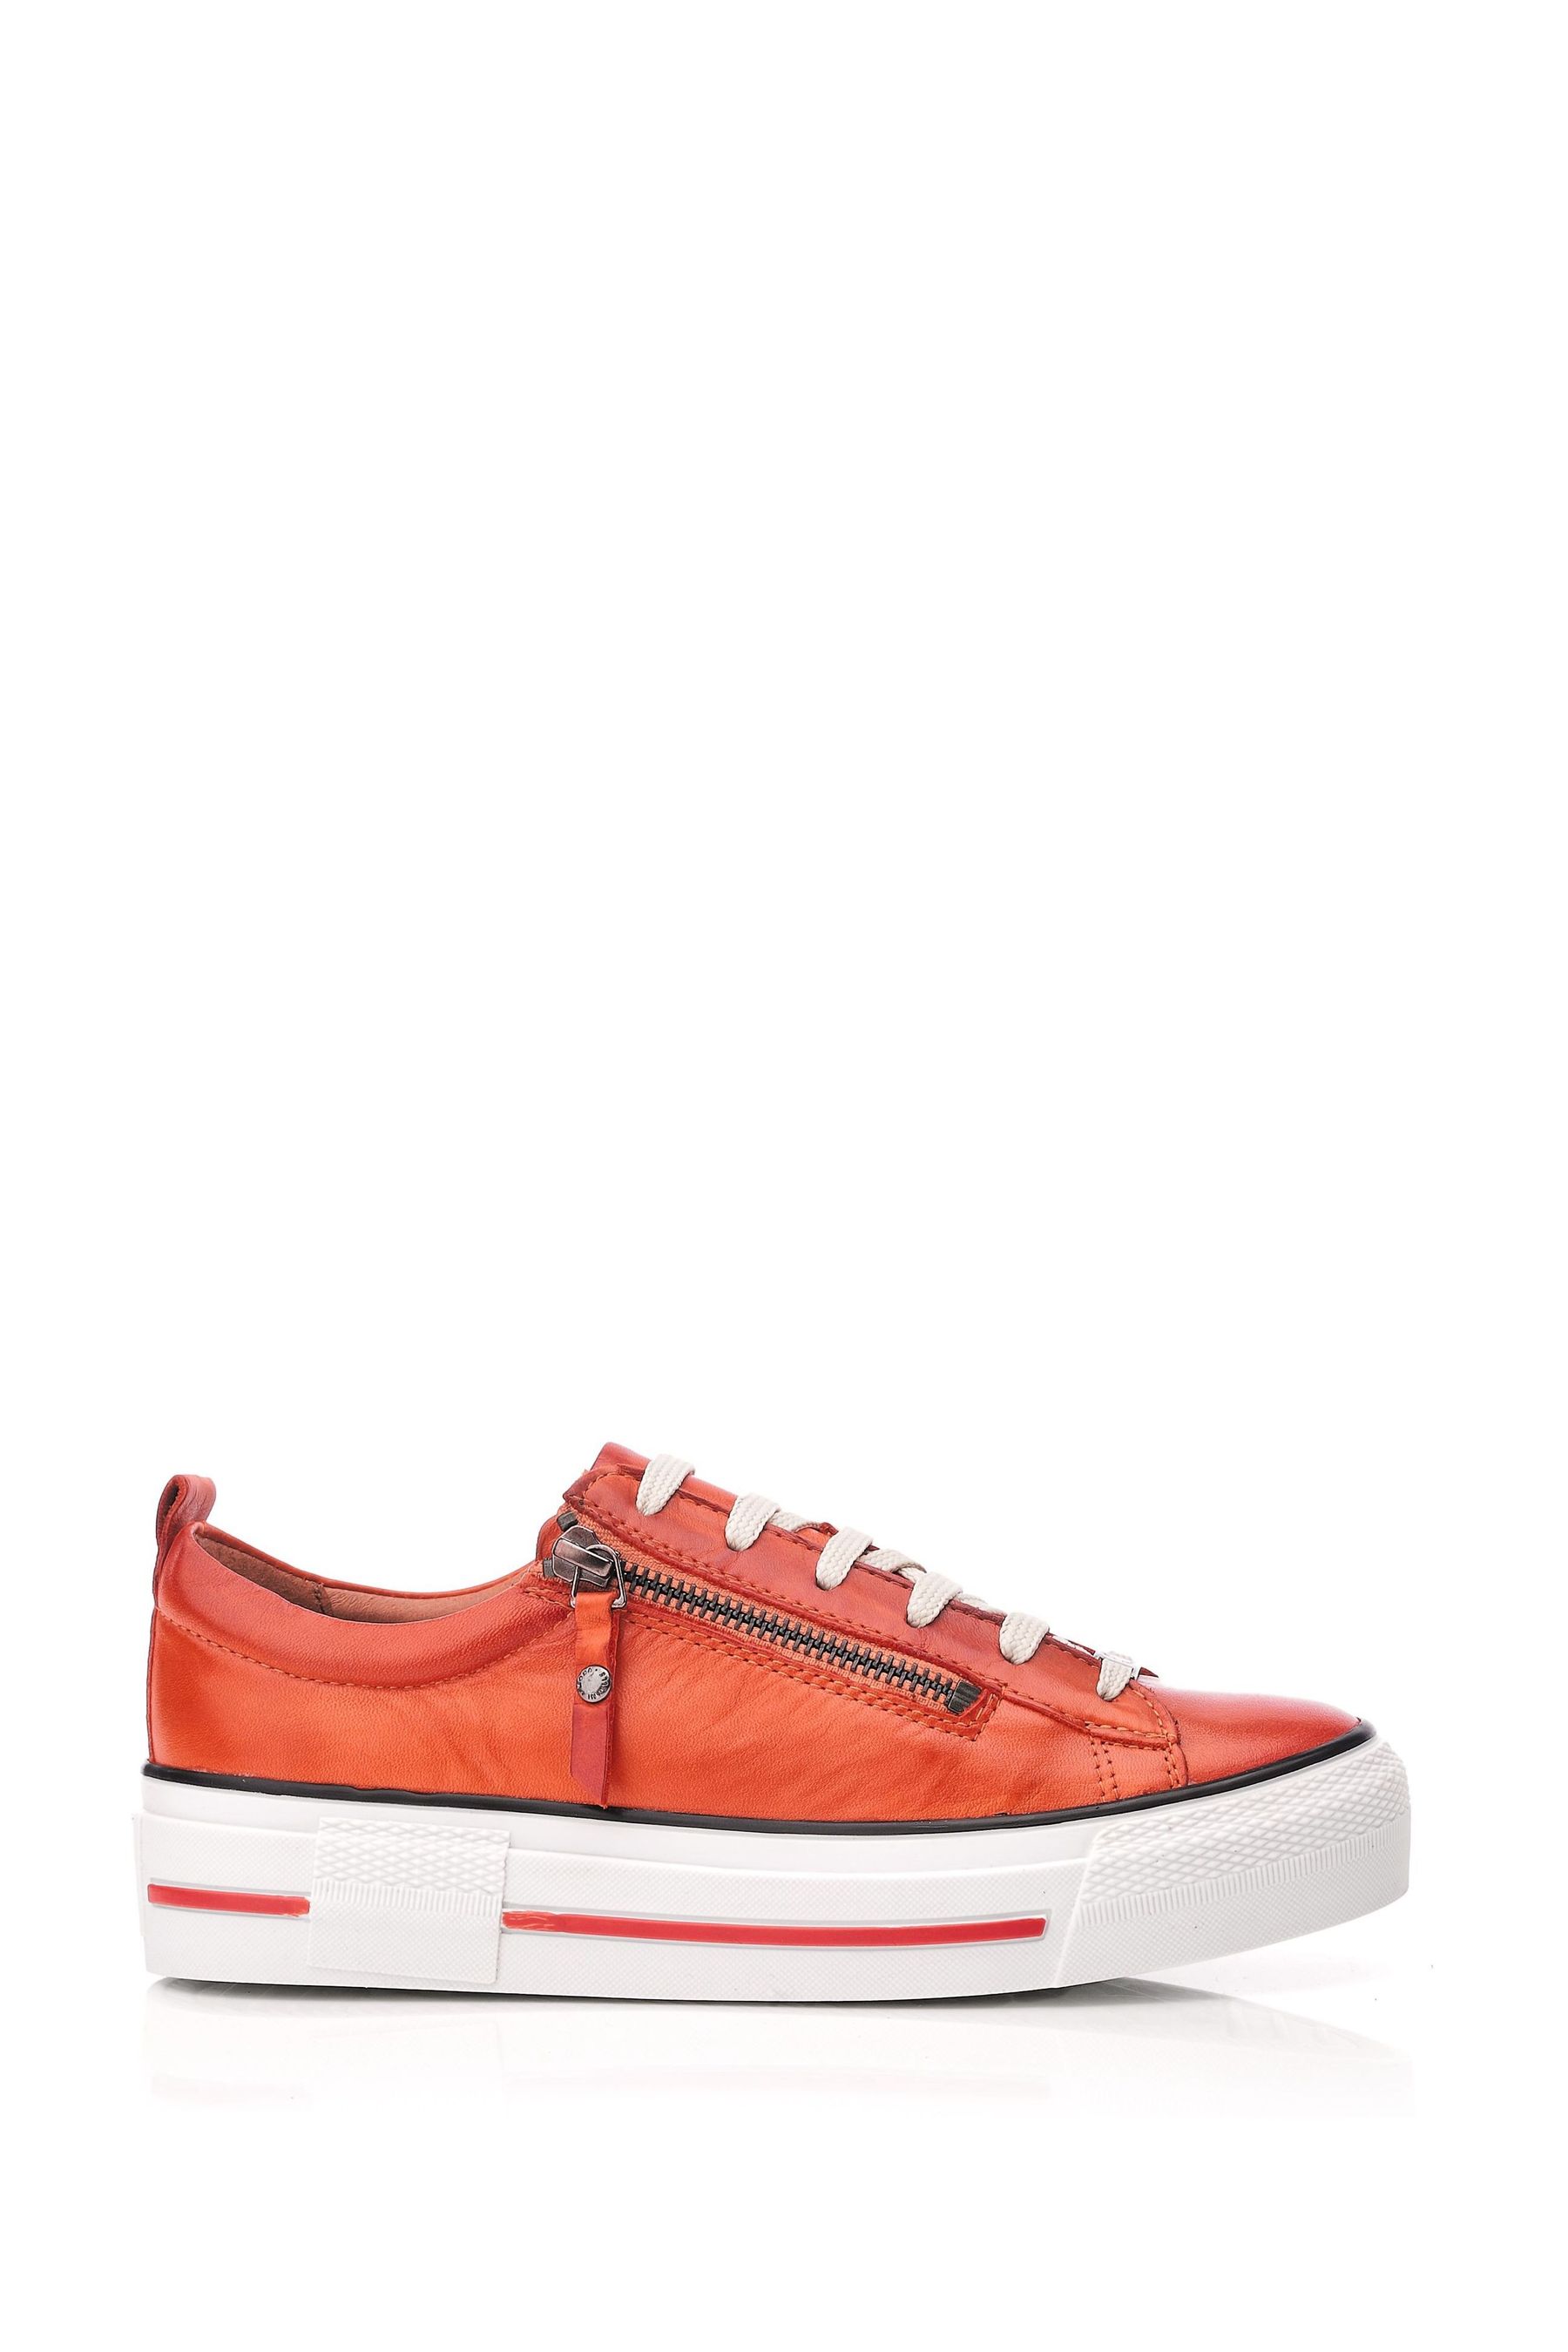 Buy Moda in Pelle Filician Zip & Lace Chunky Slab Sole Trainers from ...